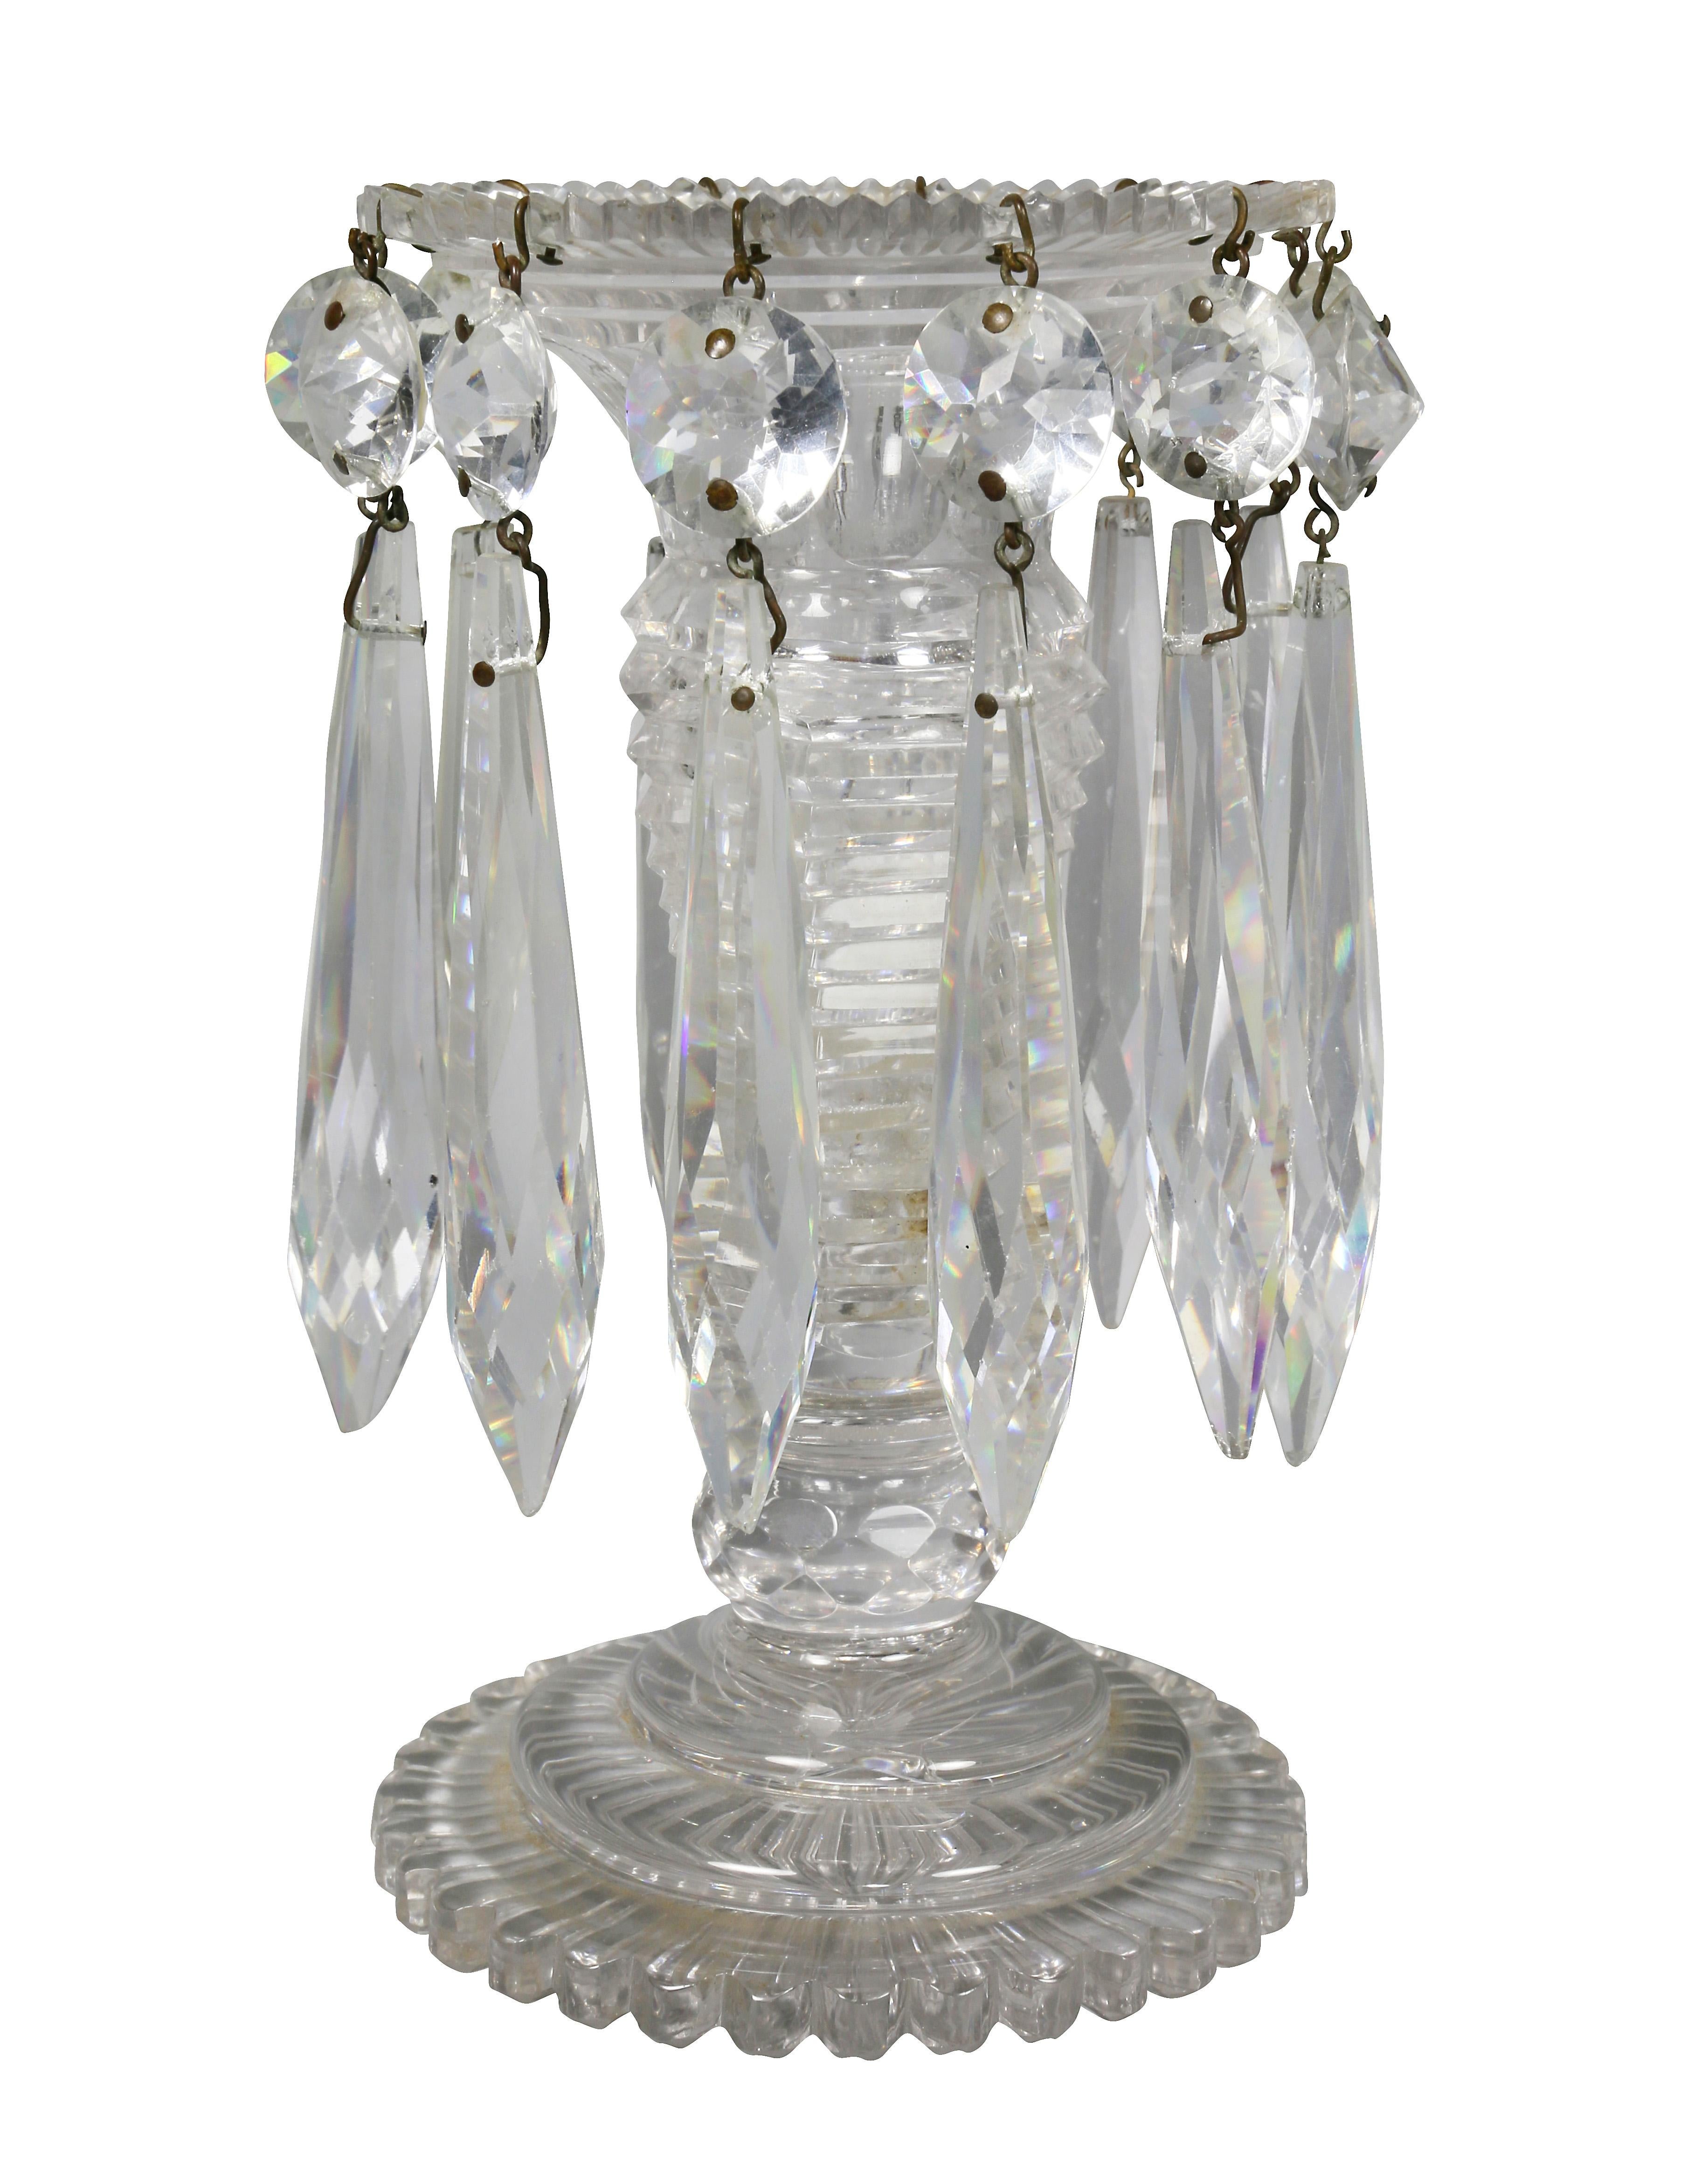 Pair of Regency Anglo Irish cut glass lustres, nicely cut overall.